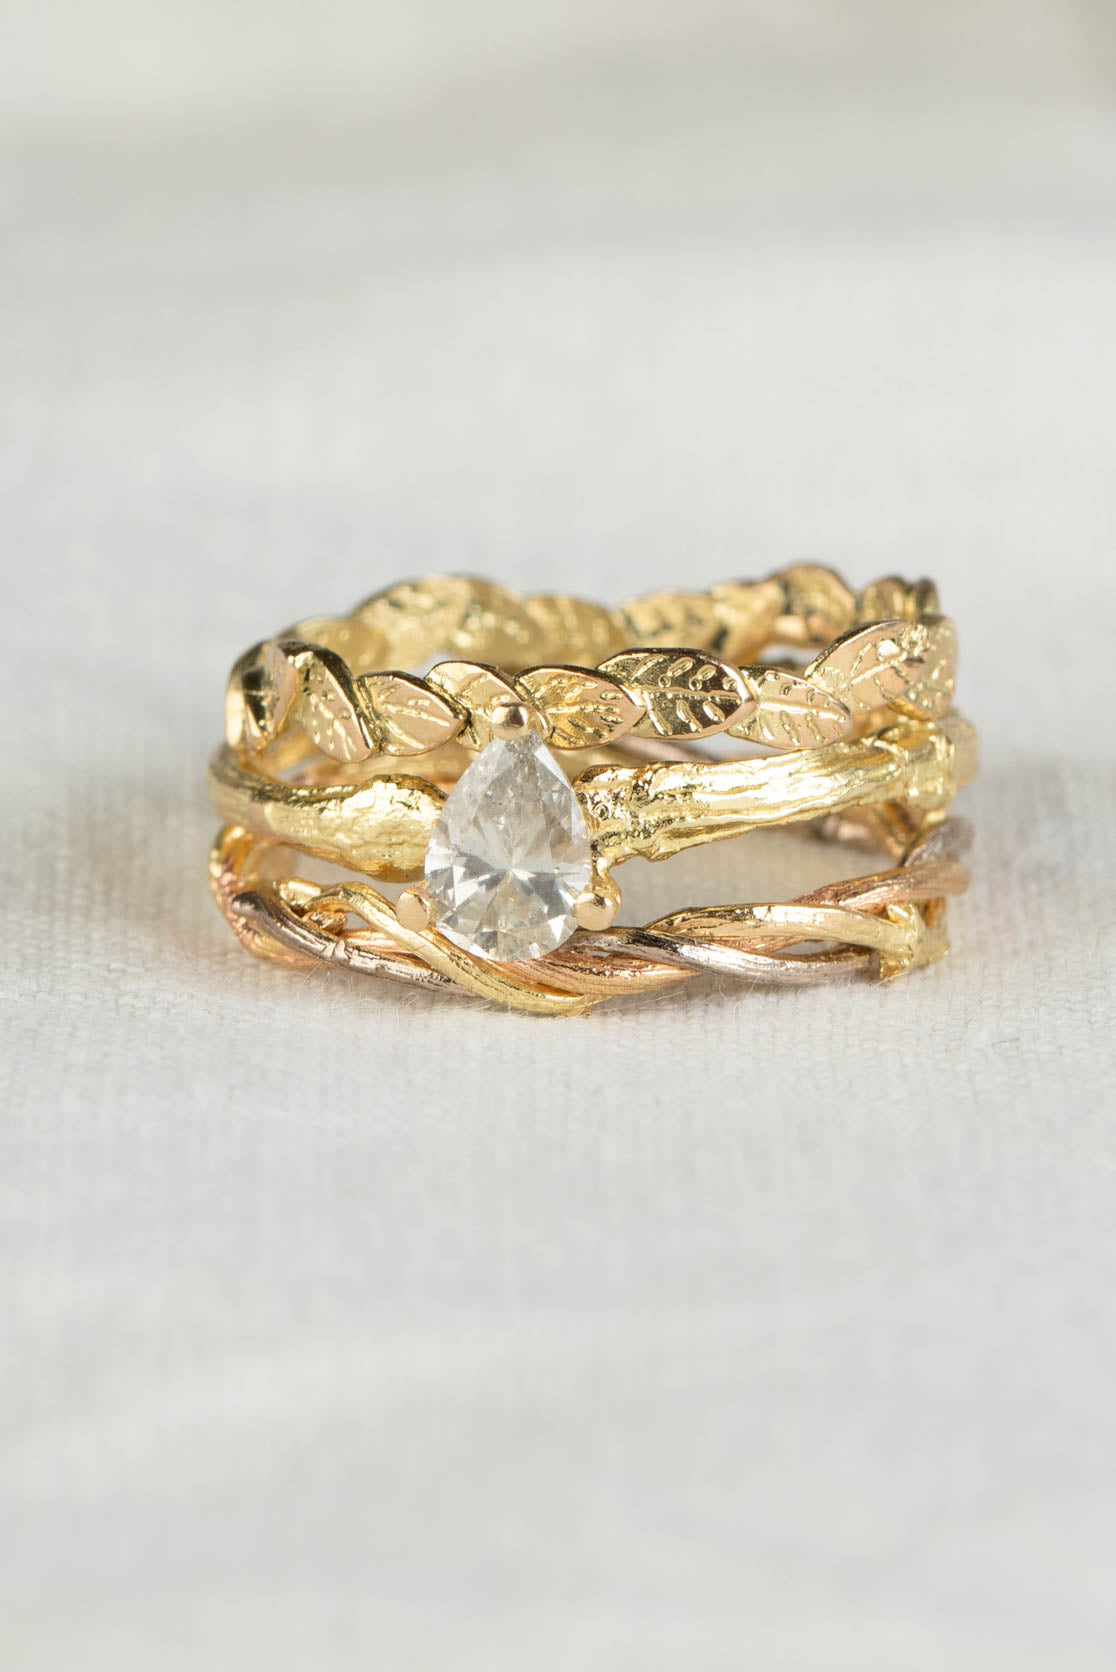 stack of handmade 18ct gold rings - leaf ring, twig ring and diamond ring